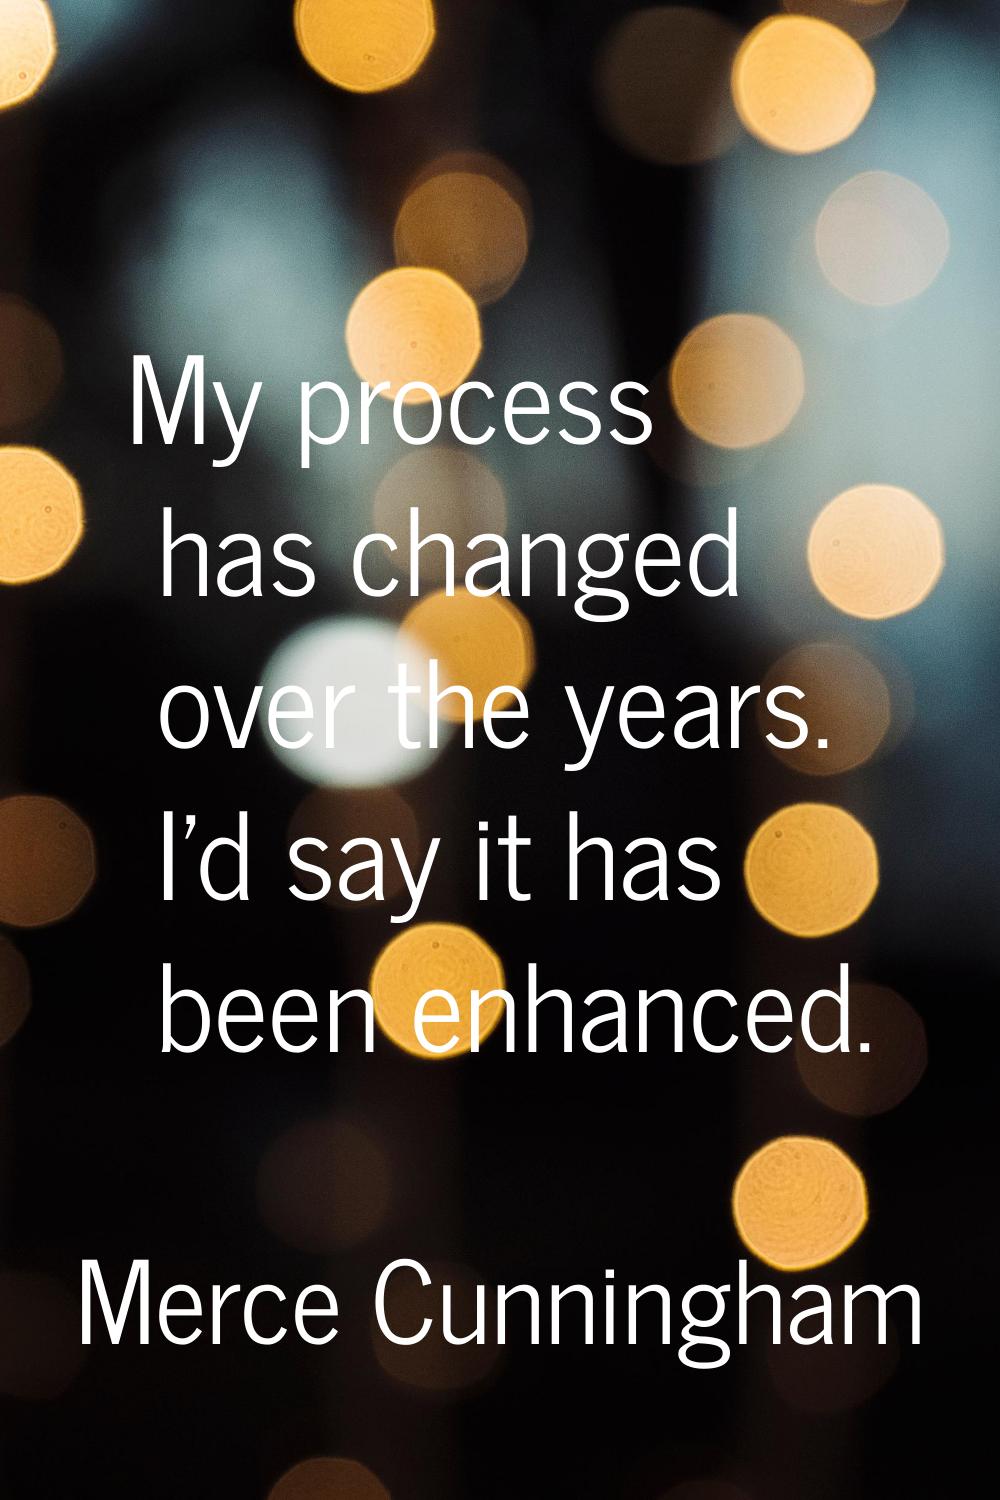 My process has changed over the years. I'd say it has been enhanced.